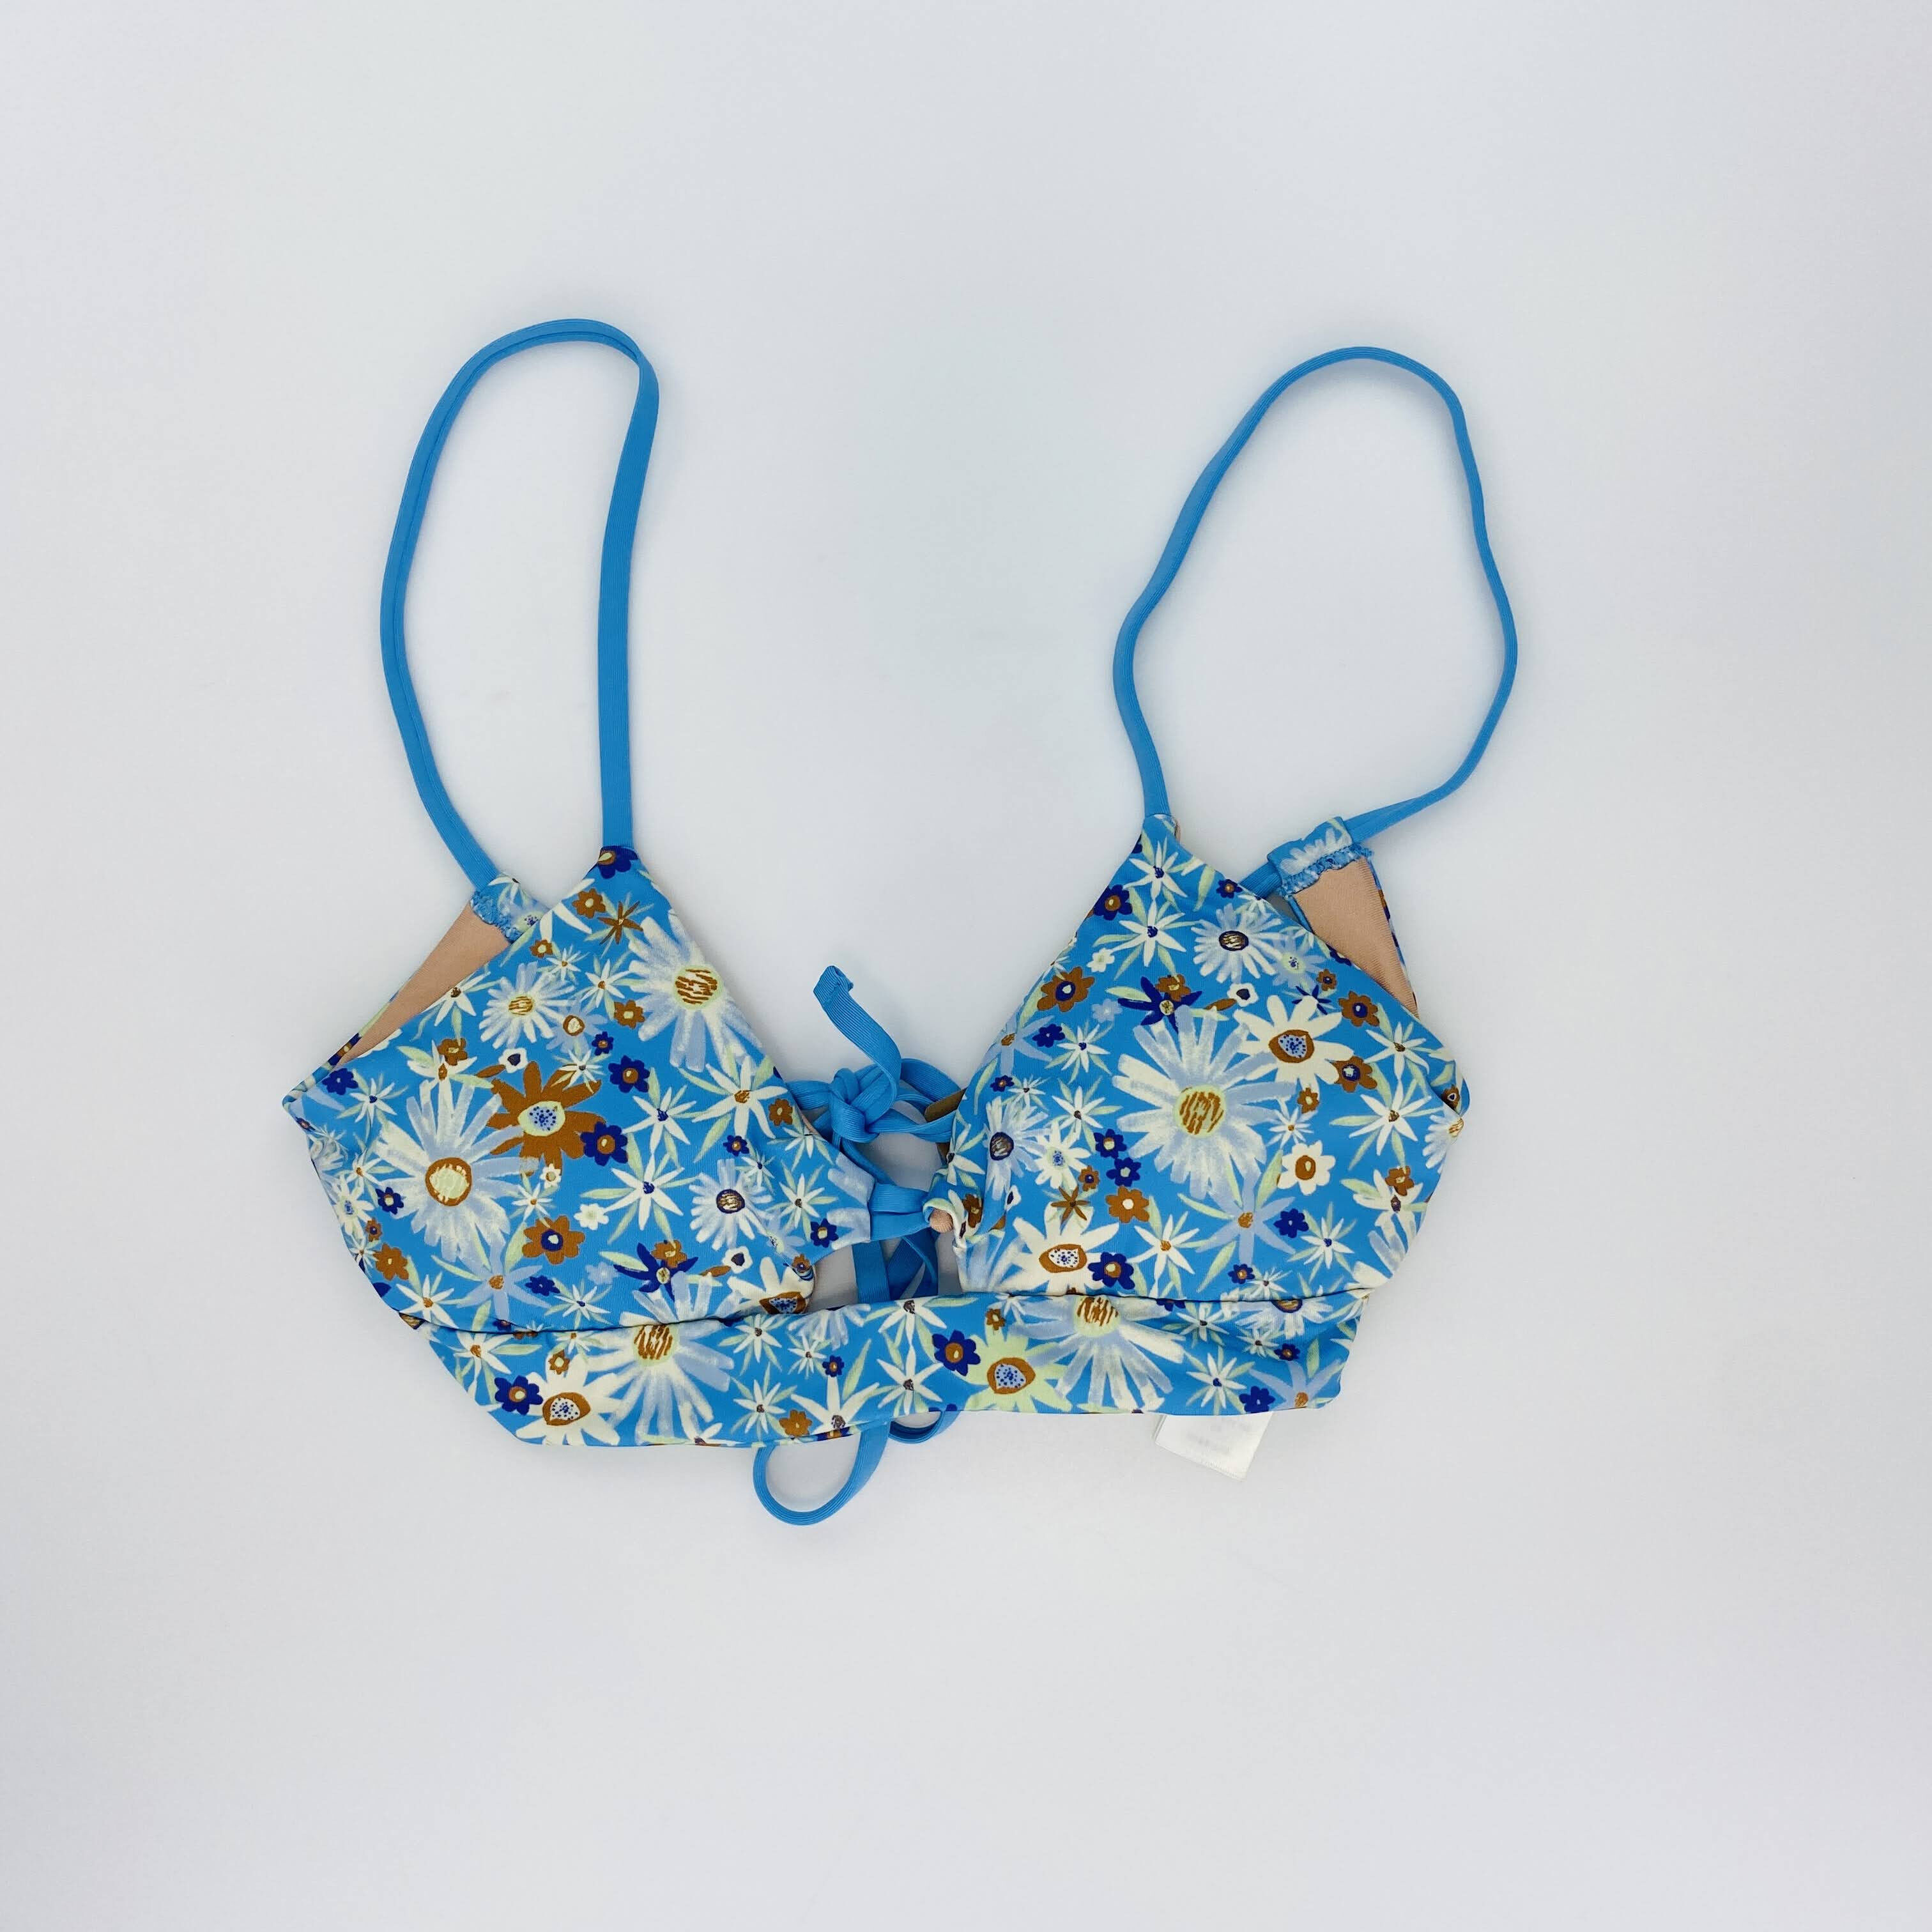 Patagonia W's Focal Point Top - Second Hand Bikini top - Blue - S | Hardloop